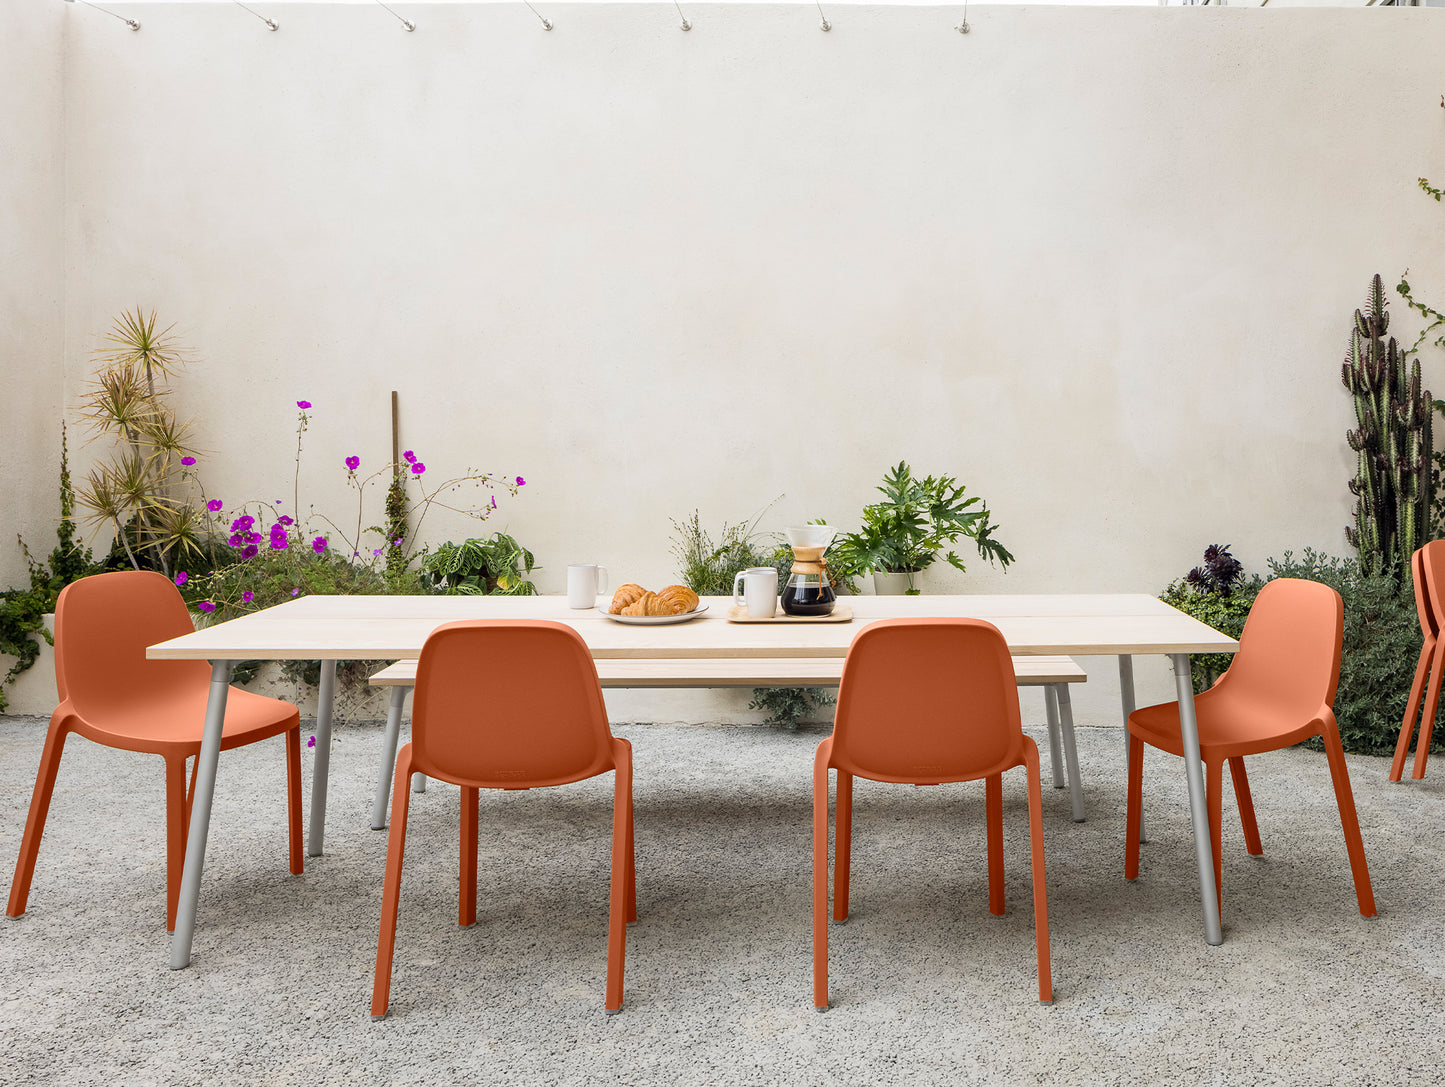 Emeco  Broom Stacking Chair by Emeco - Terracotta Orange